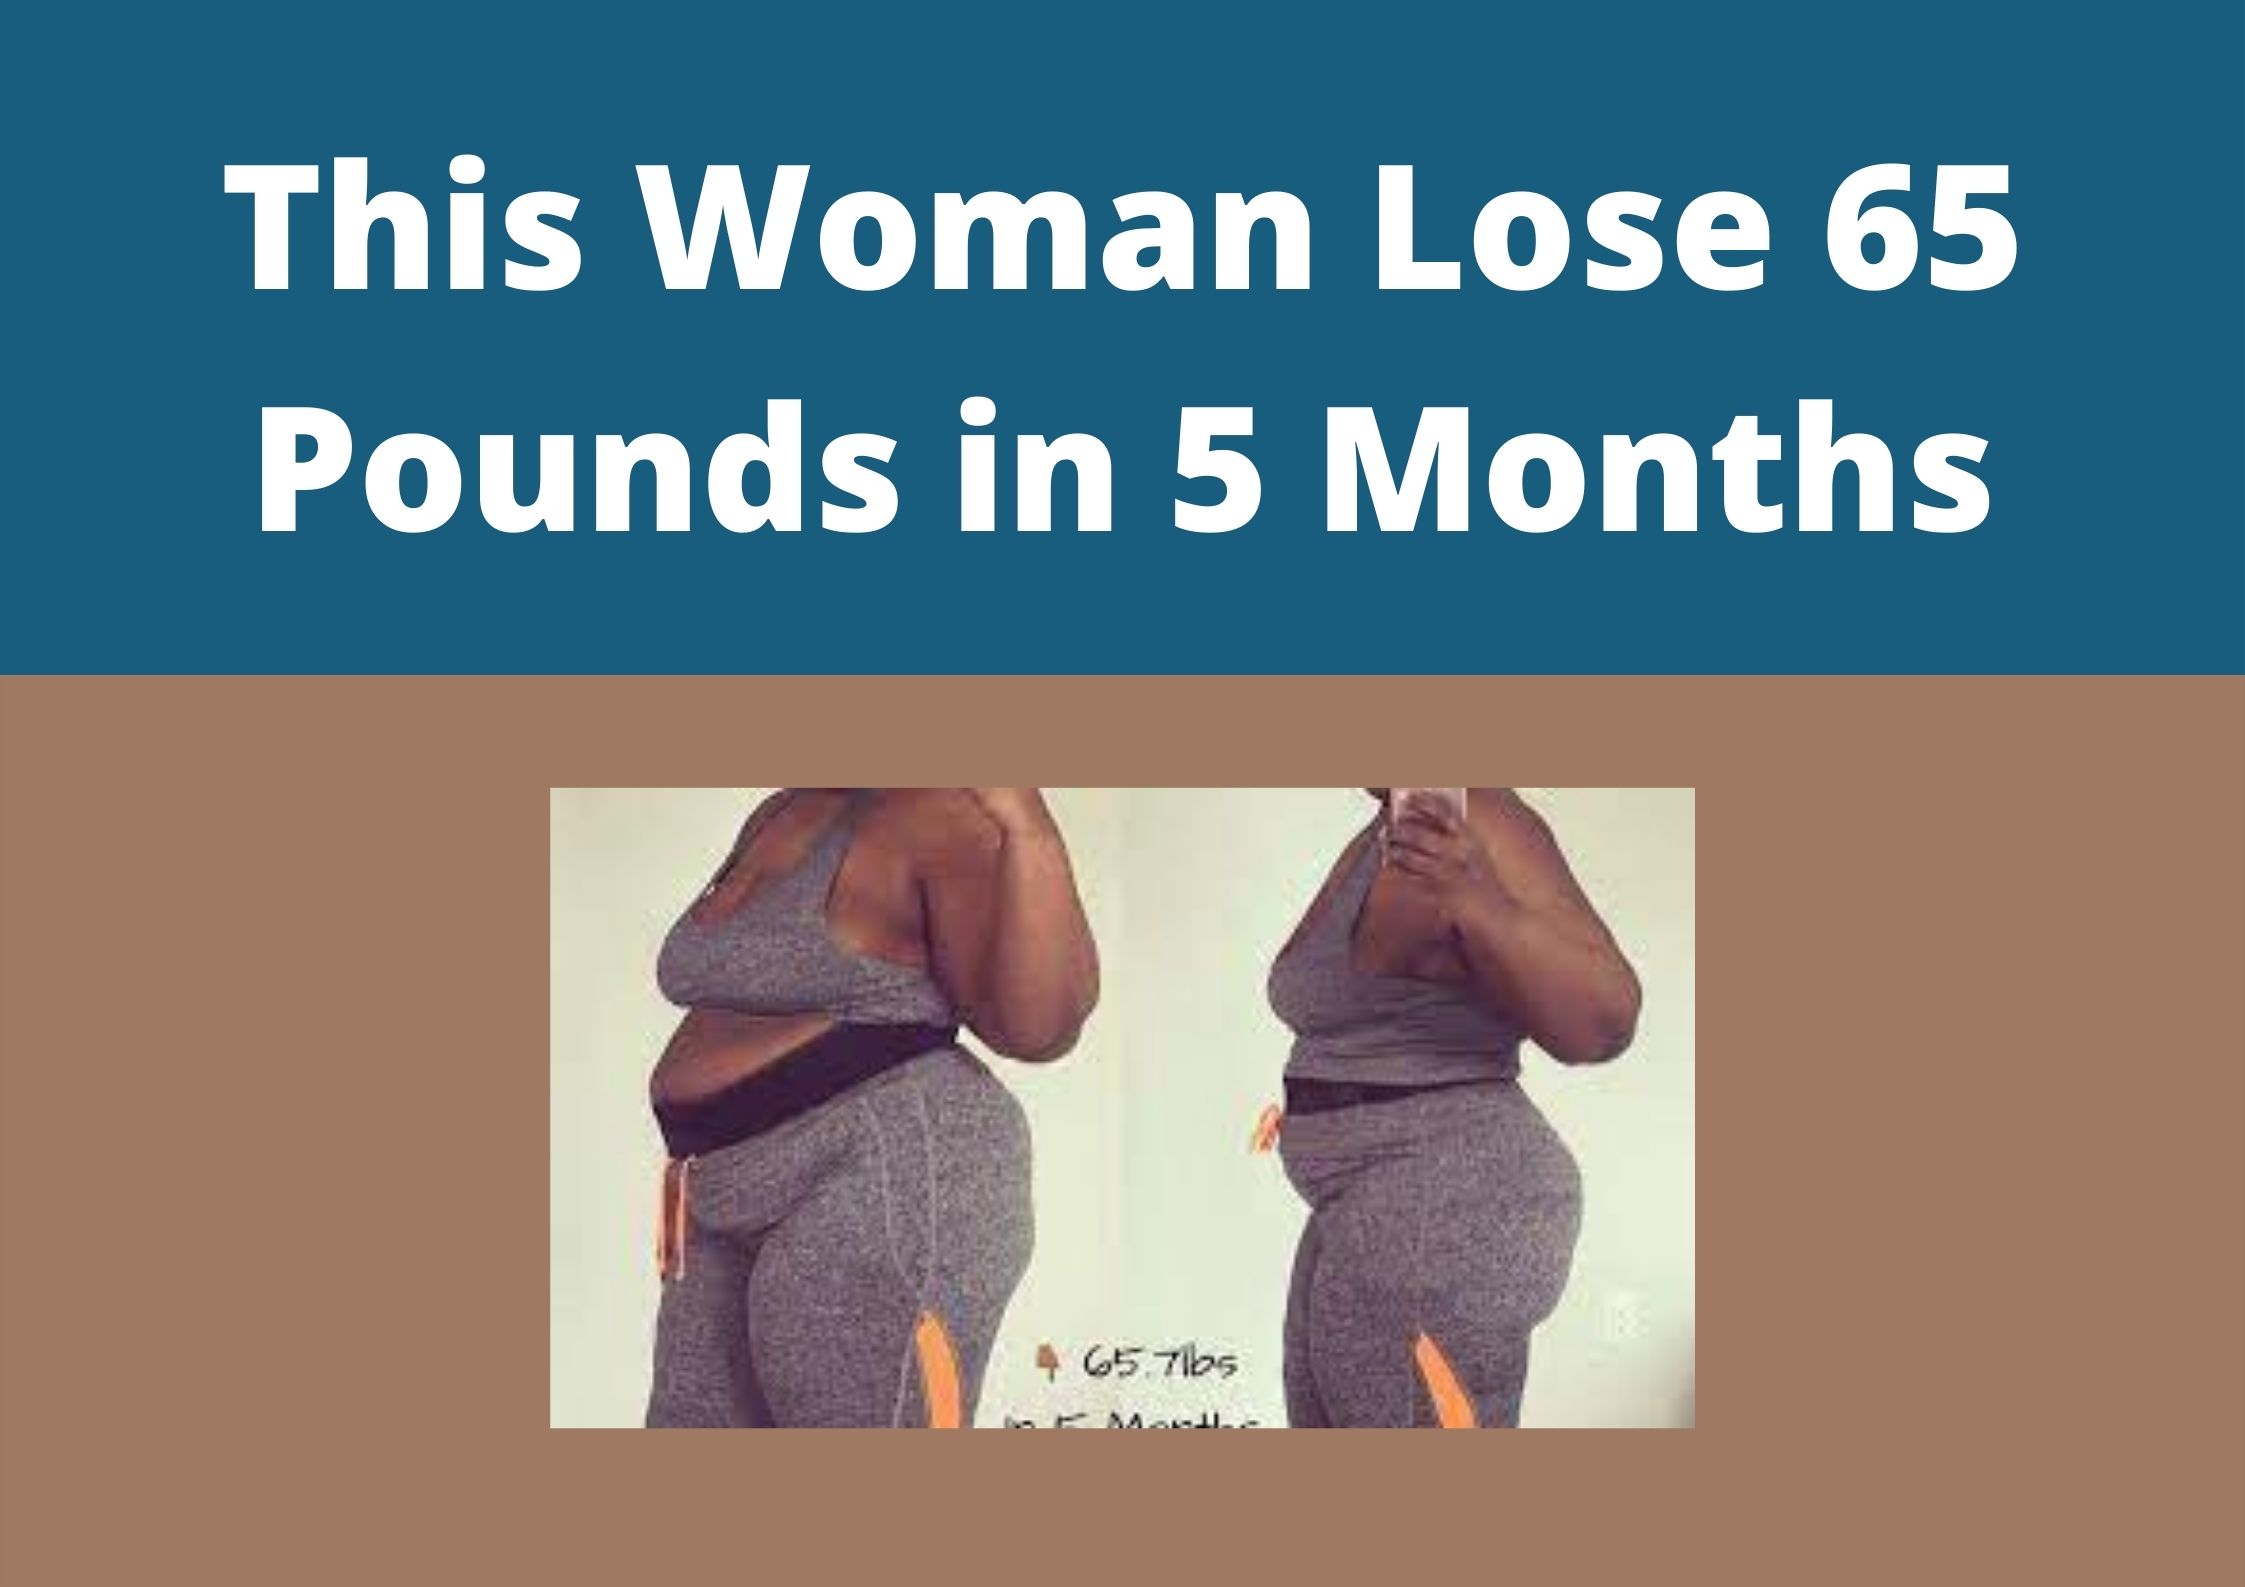 This Woman Lose 65 Pounds in 5 Months